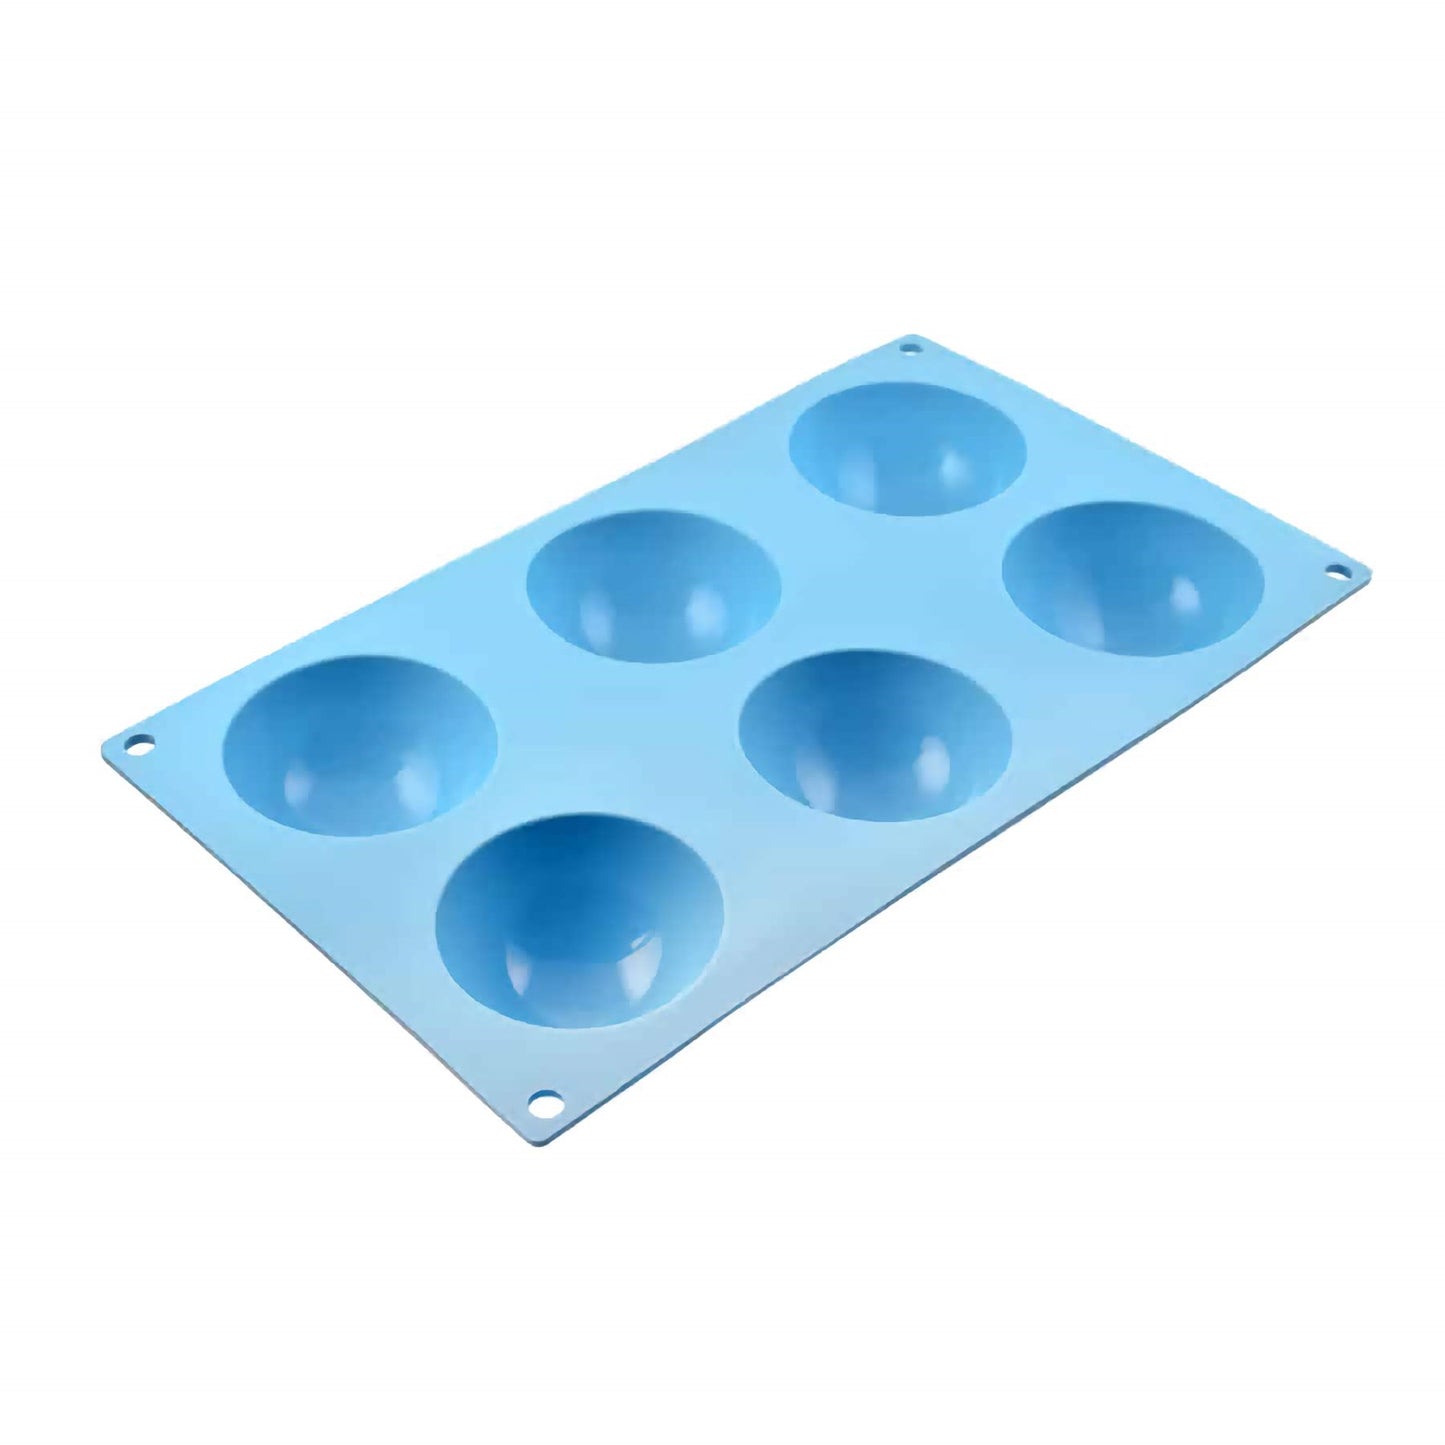 A light blue silicone mold for creating hot chocolate bombs, lying flat against a white background. The mold has six round cavities that are half-spherical in shape, designed to make half of a spherical hot chocolate bomb each. The cavities are arranged in two rows of three and are sized to create 2.5-inch diameter chocolate spheres when completed. The flexible material of the mold suggests it is designed for easy release of the finished chocolate pieces.